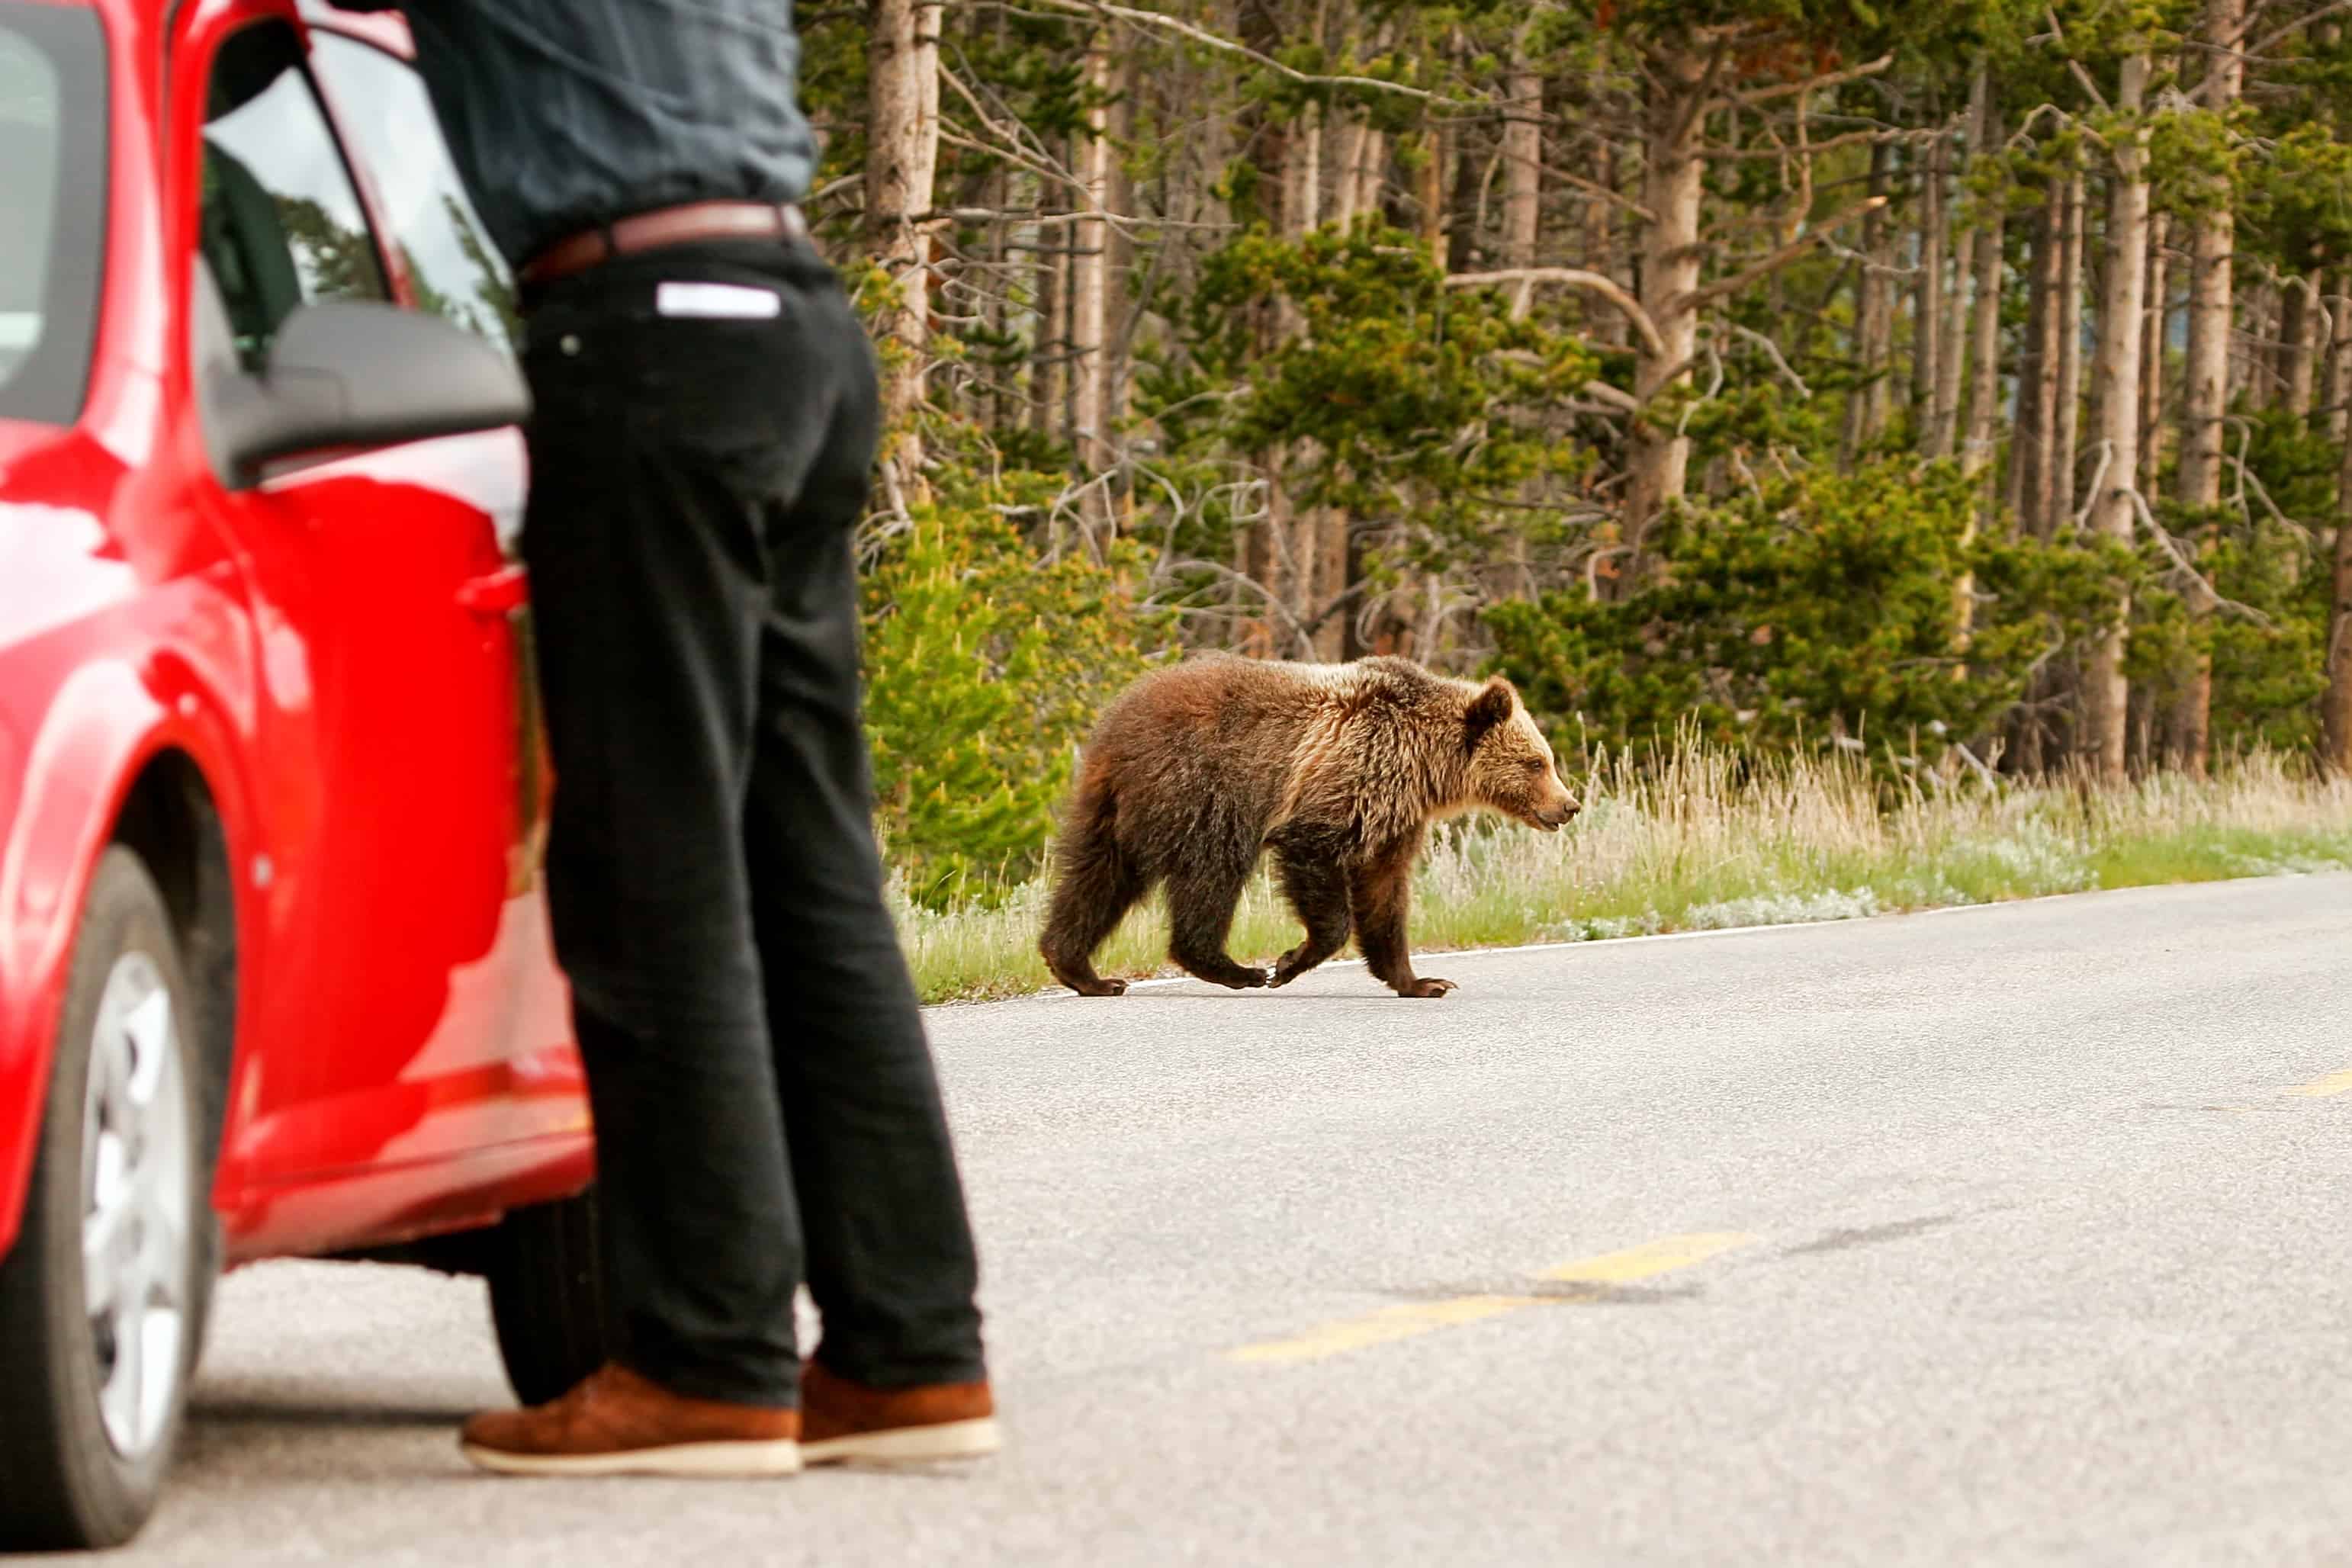 Young Grizzly bear crossing road in Yellowstone National Park, Wyoming